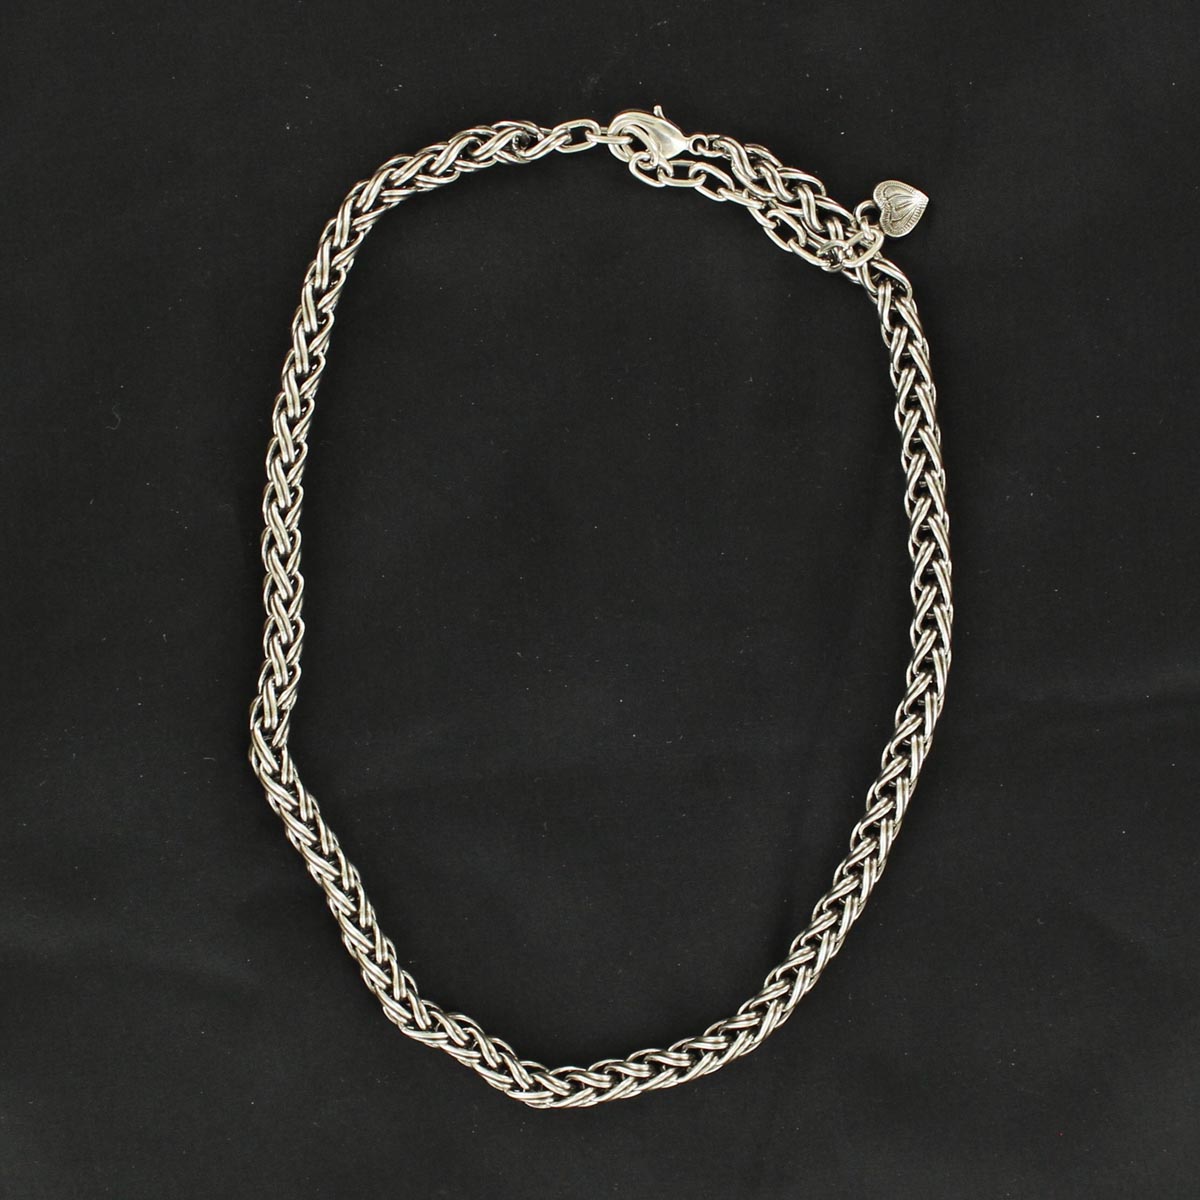 29556 Large Braid Chain Necklace - Fits 16 To 18 In.